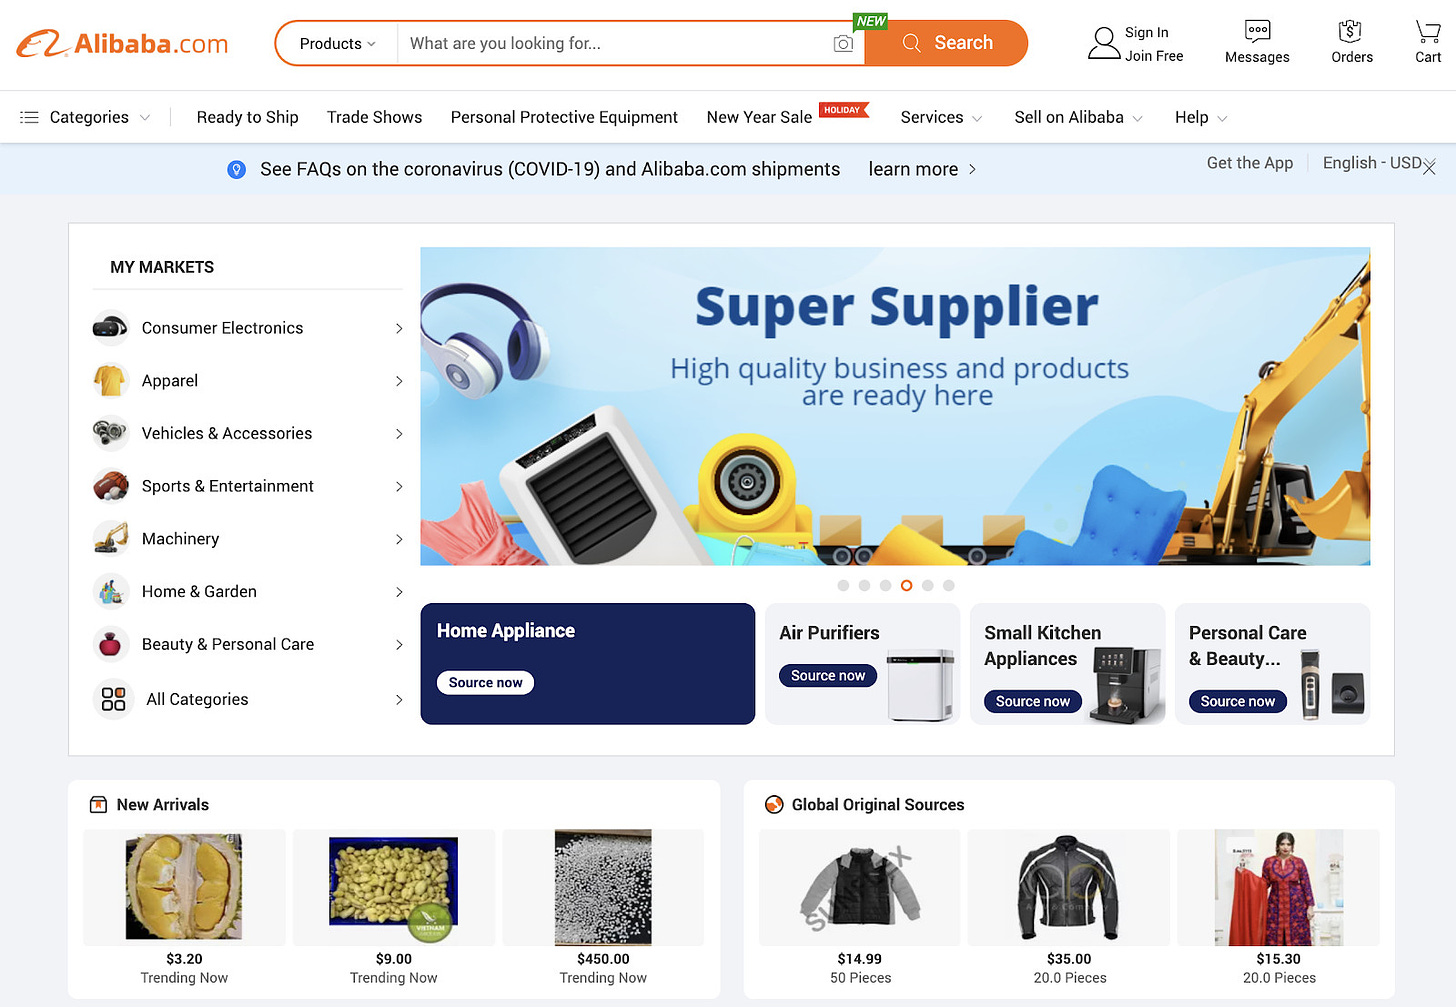 Alibaba Dropshipping: How to Safely Buy From Alibaba (2021)